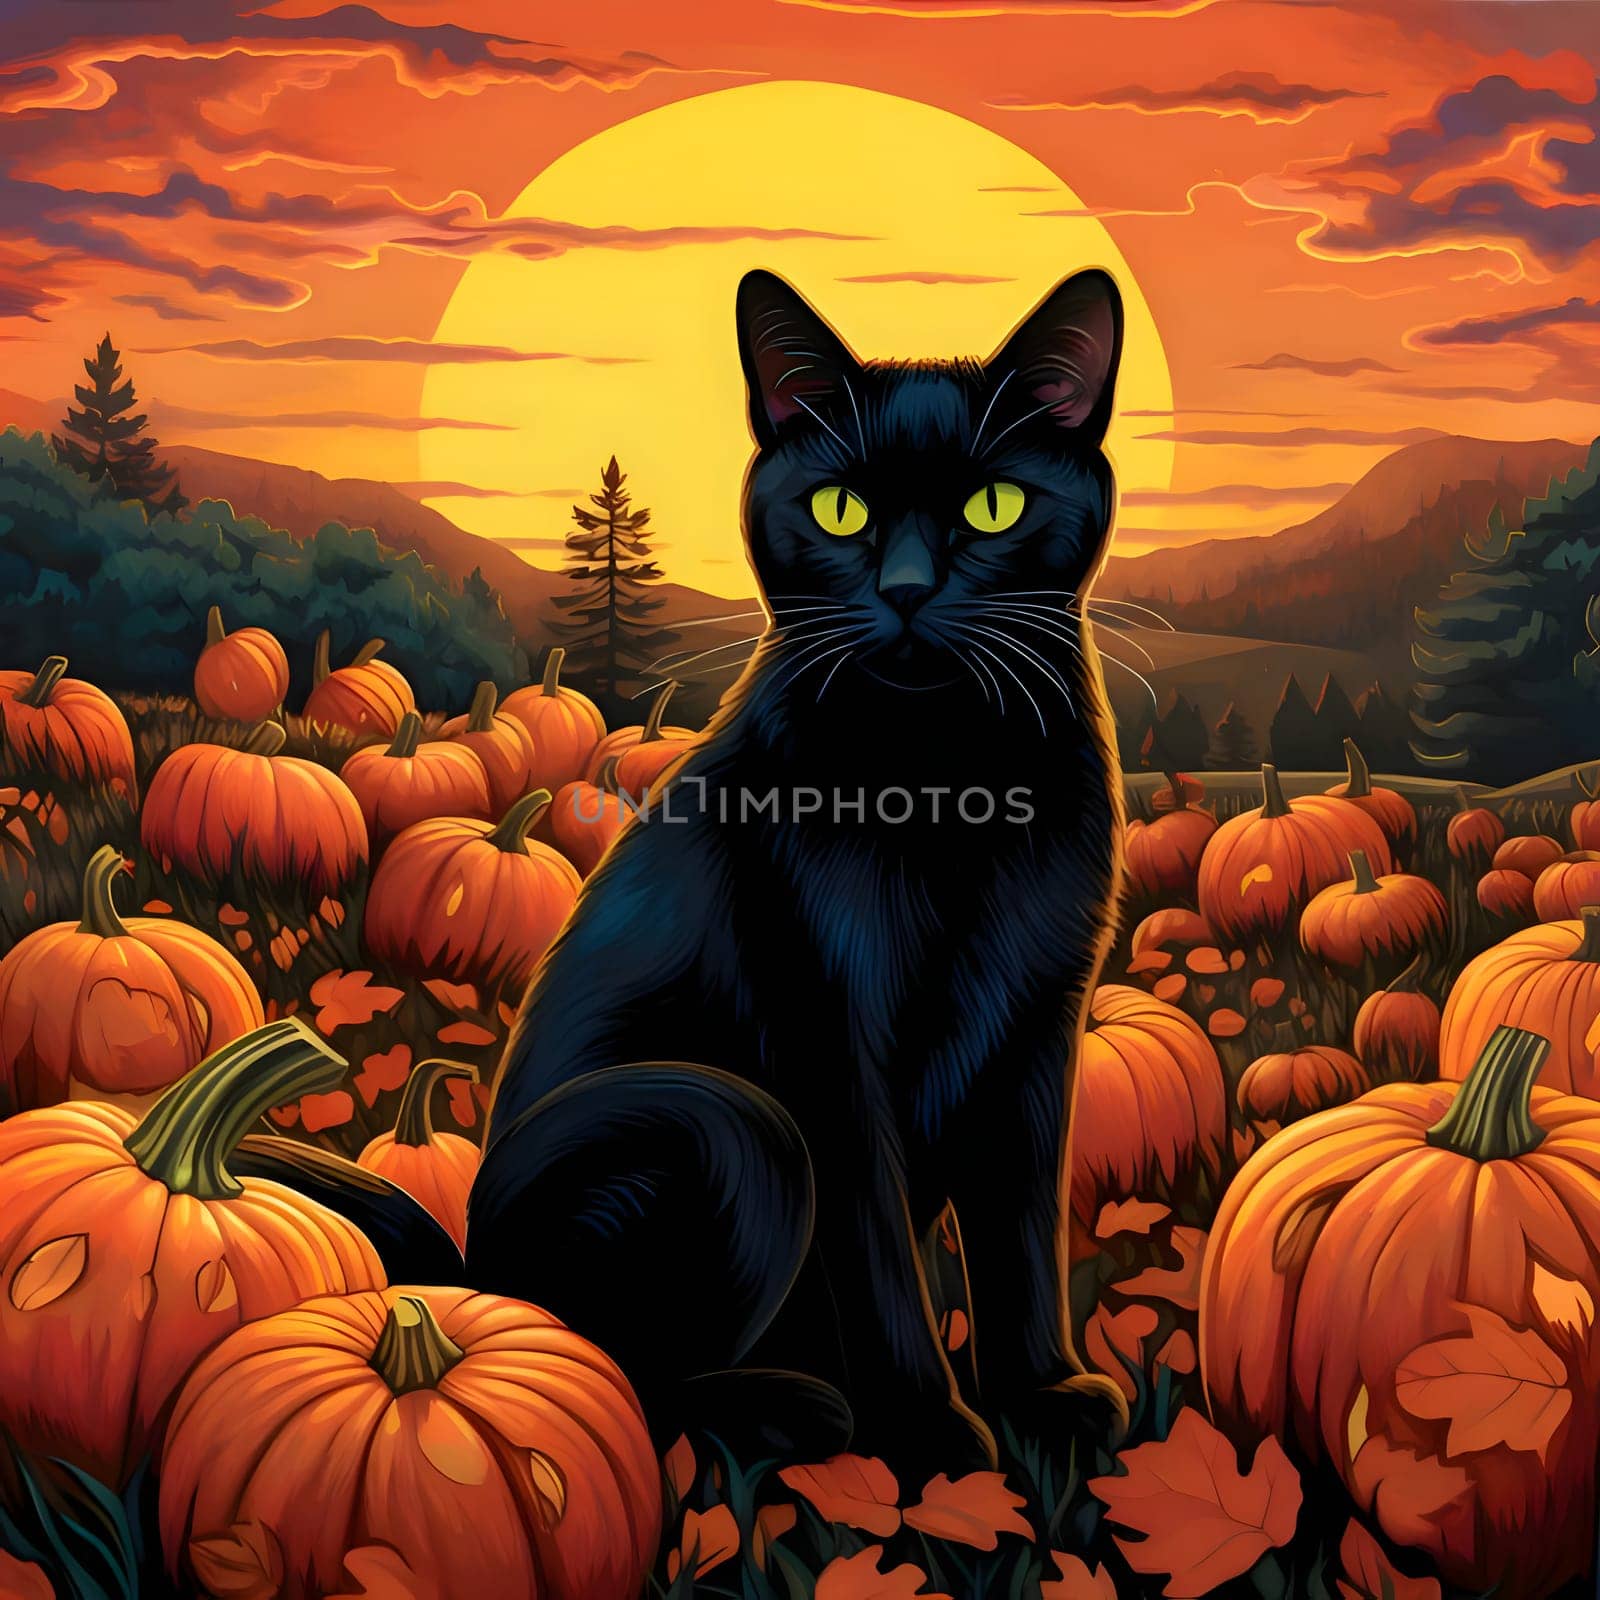 Patterns and banners backgrounds: Black cat sitting on a pumpkin field at sunset. Vector illustration.